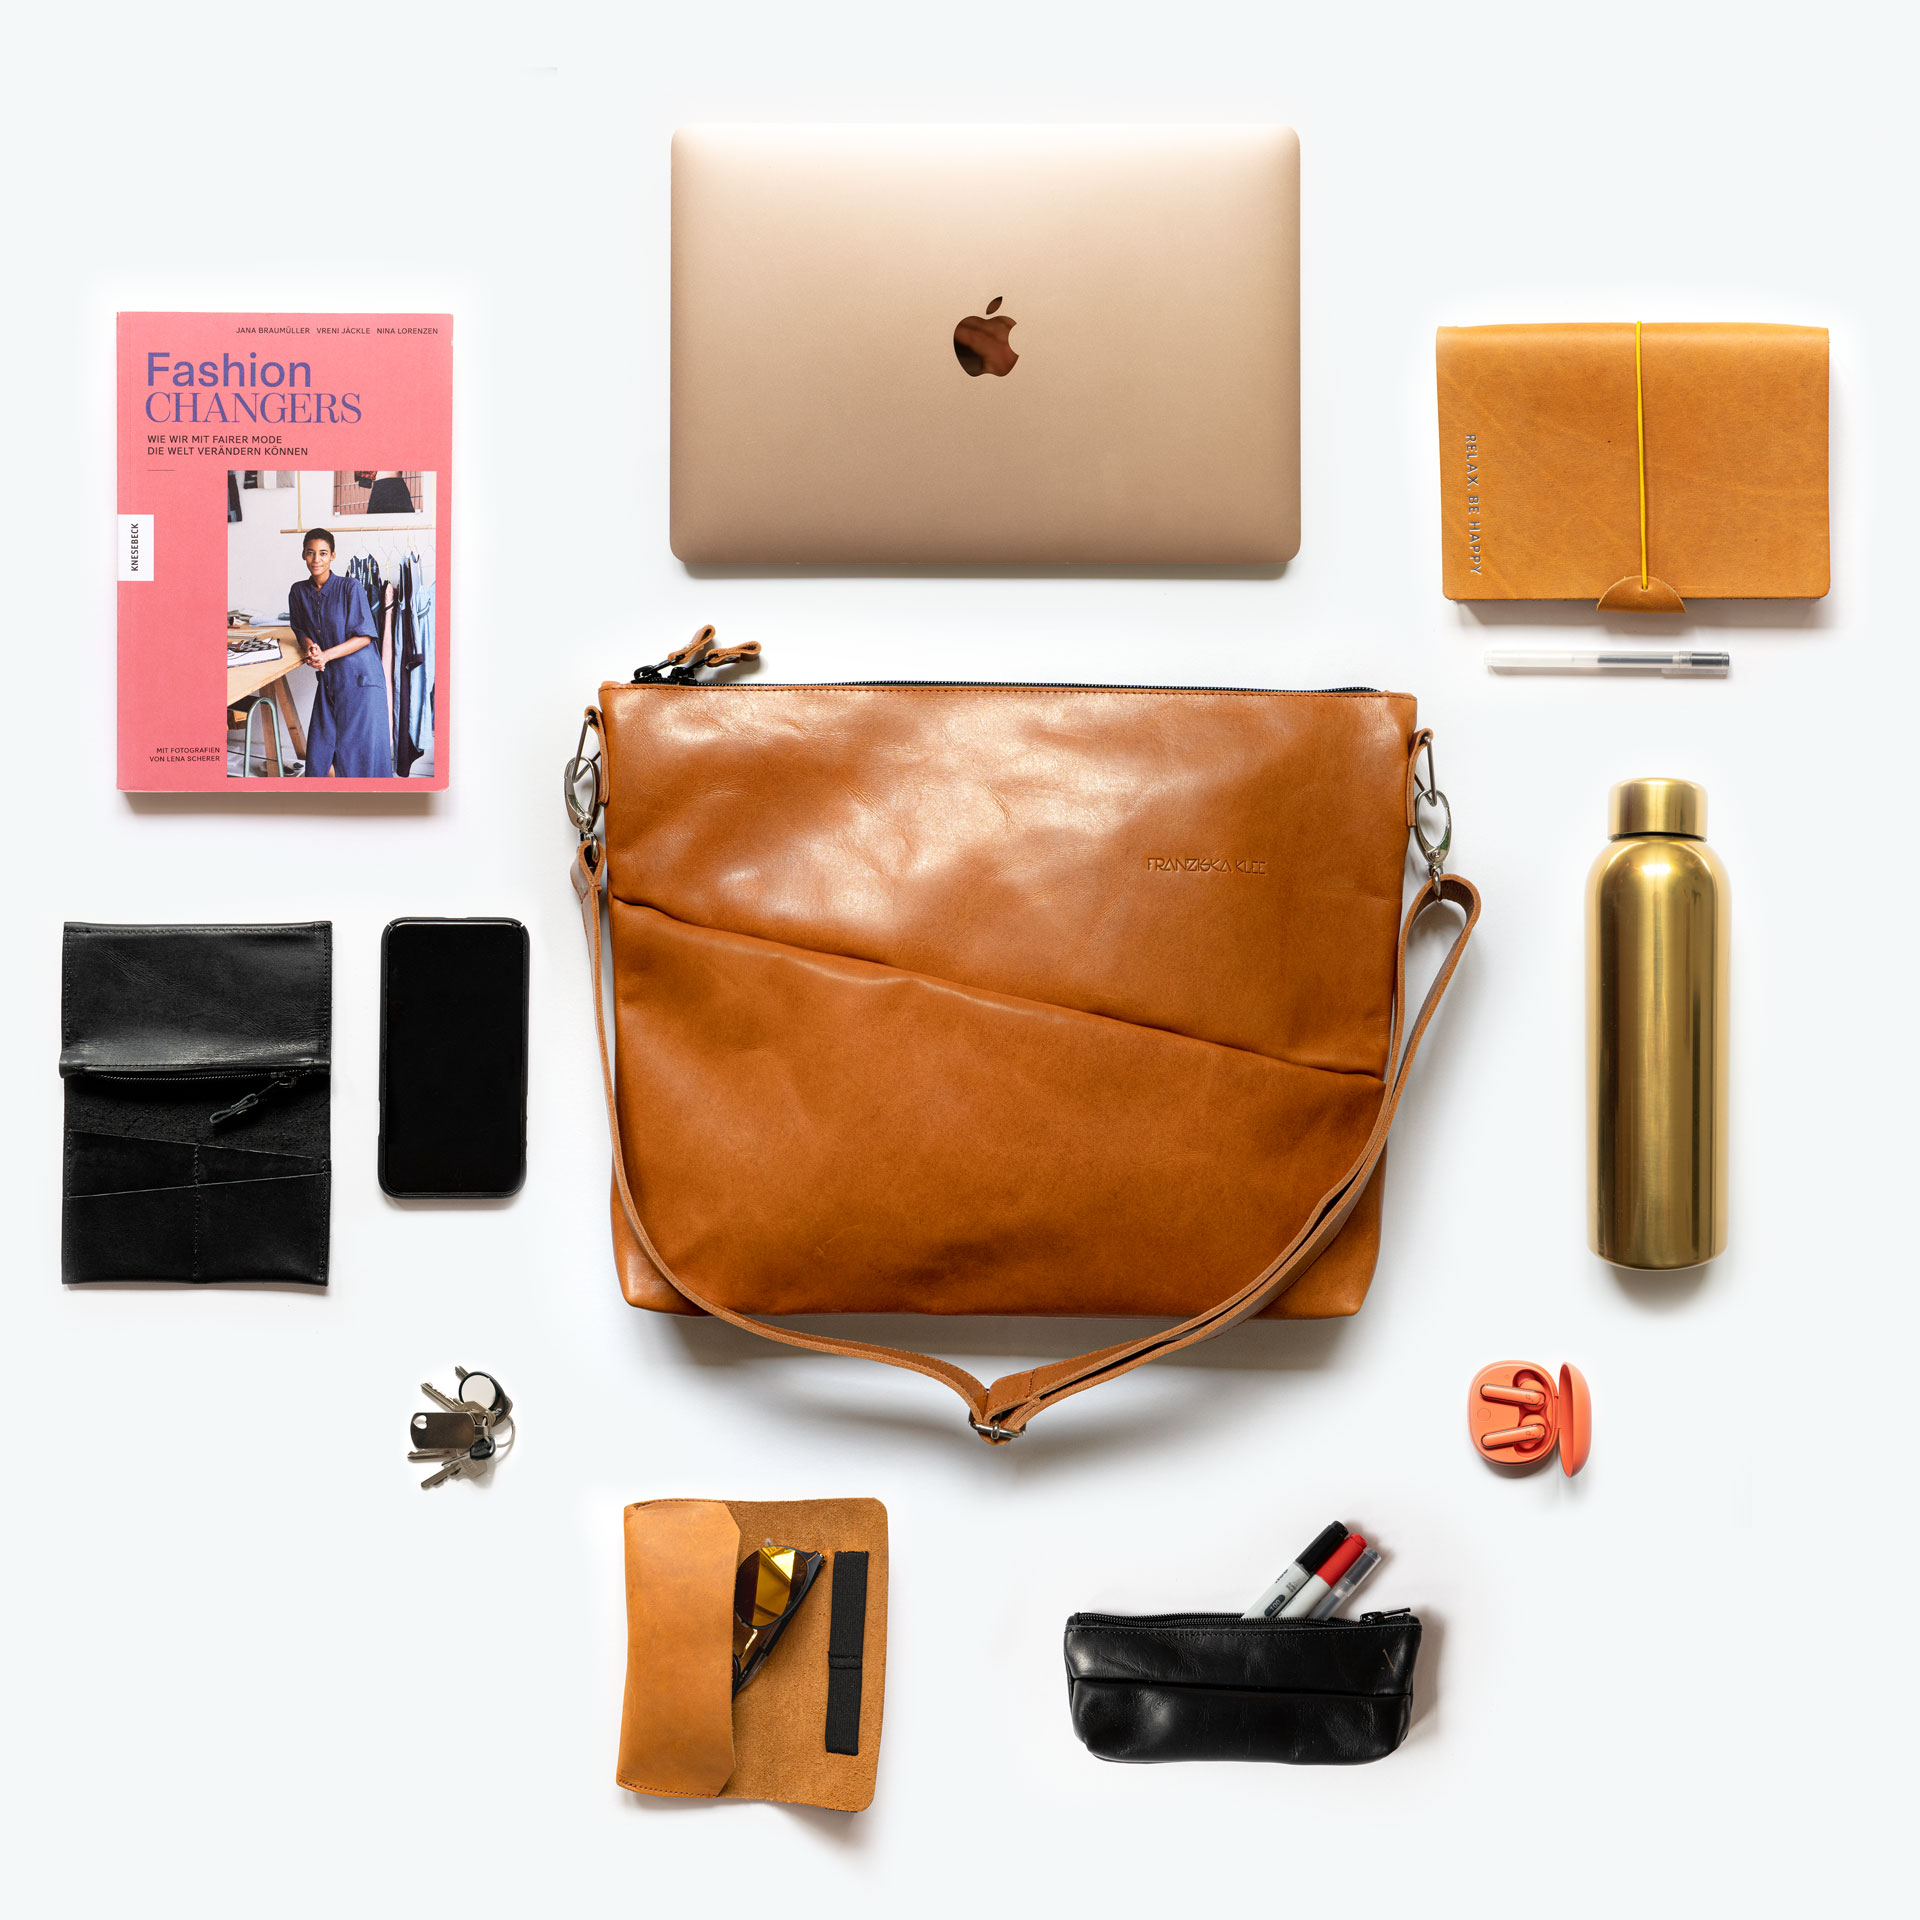 From 13-inch laptop to lunch box shoulder bag ANA swallows all the things that are important to you in everyday life.